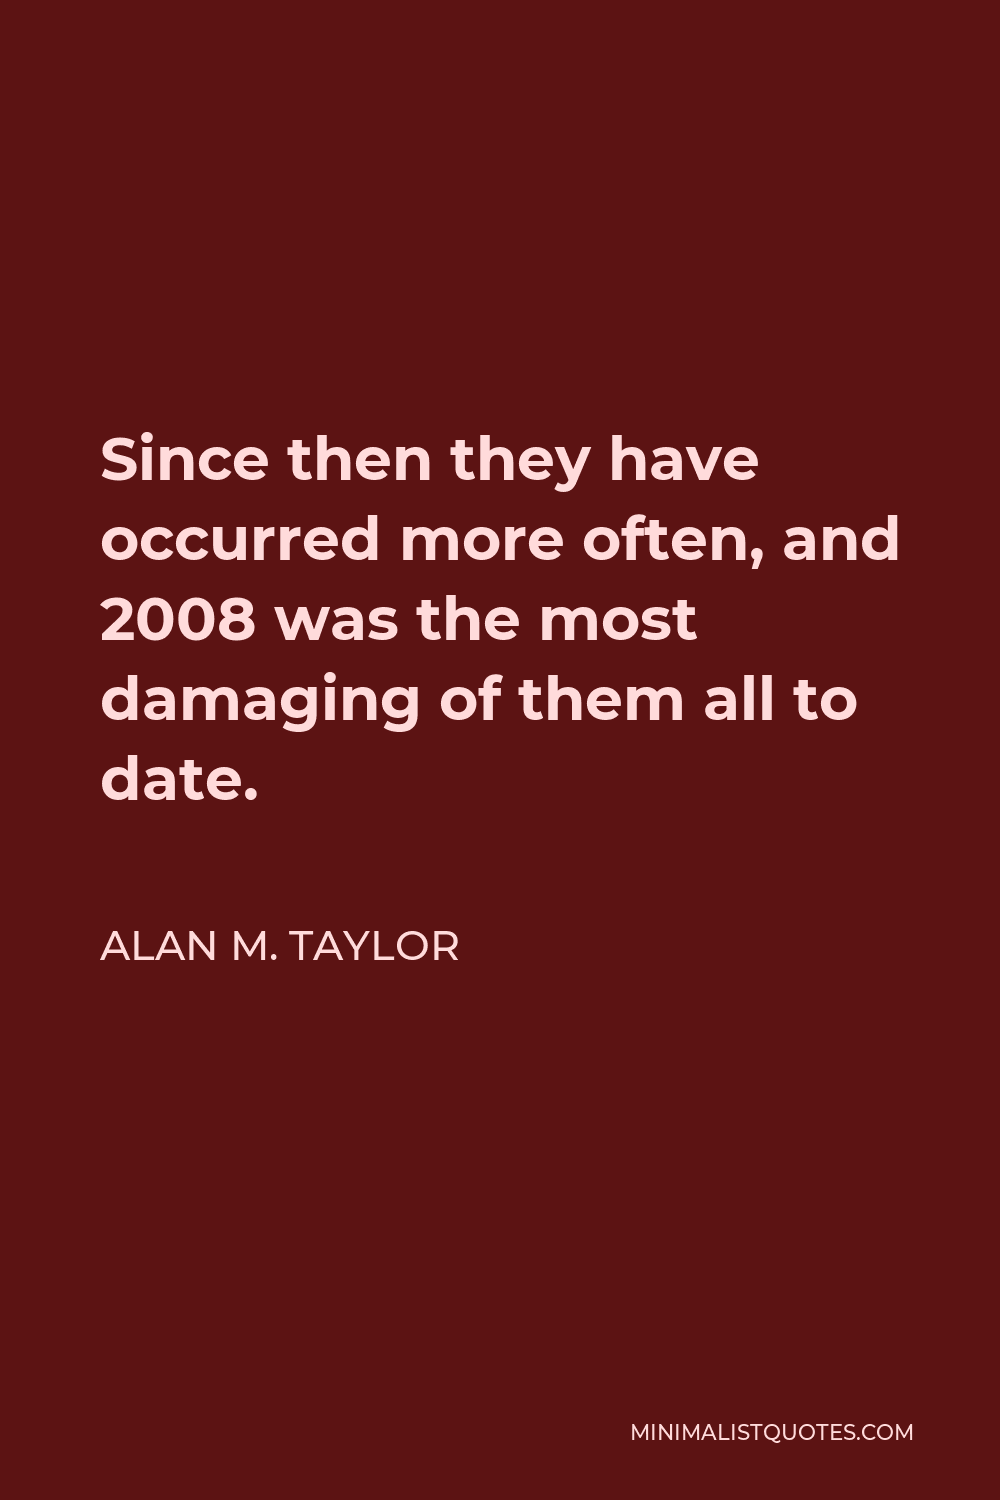 Alan M. Taylor Quote - Since then they have occurred more often, and 2008 was the most damaging of them all to date.